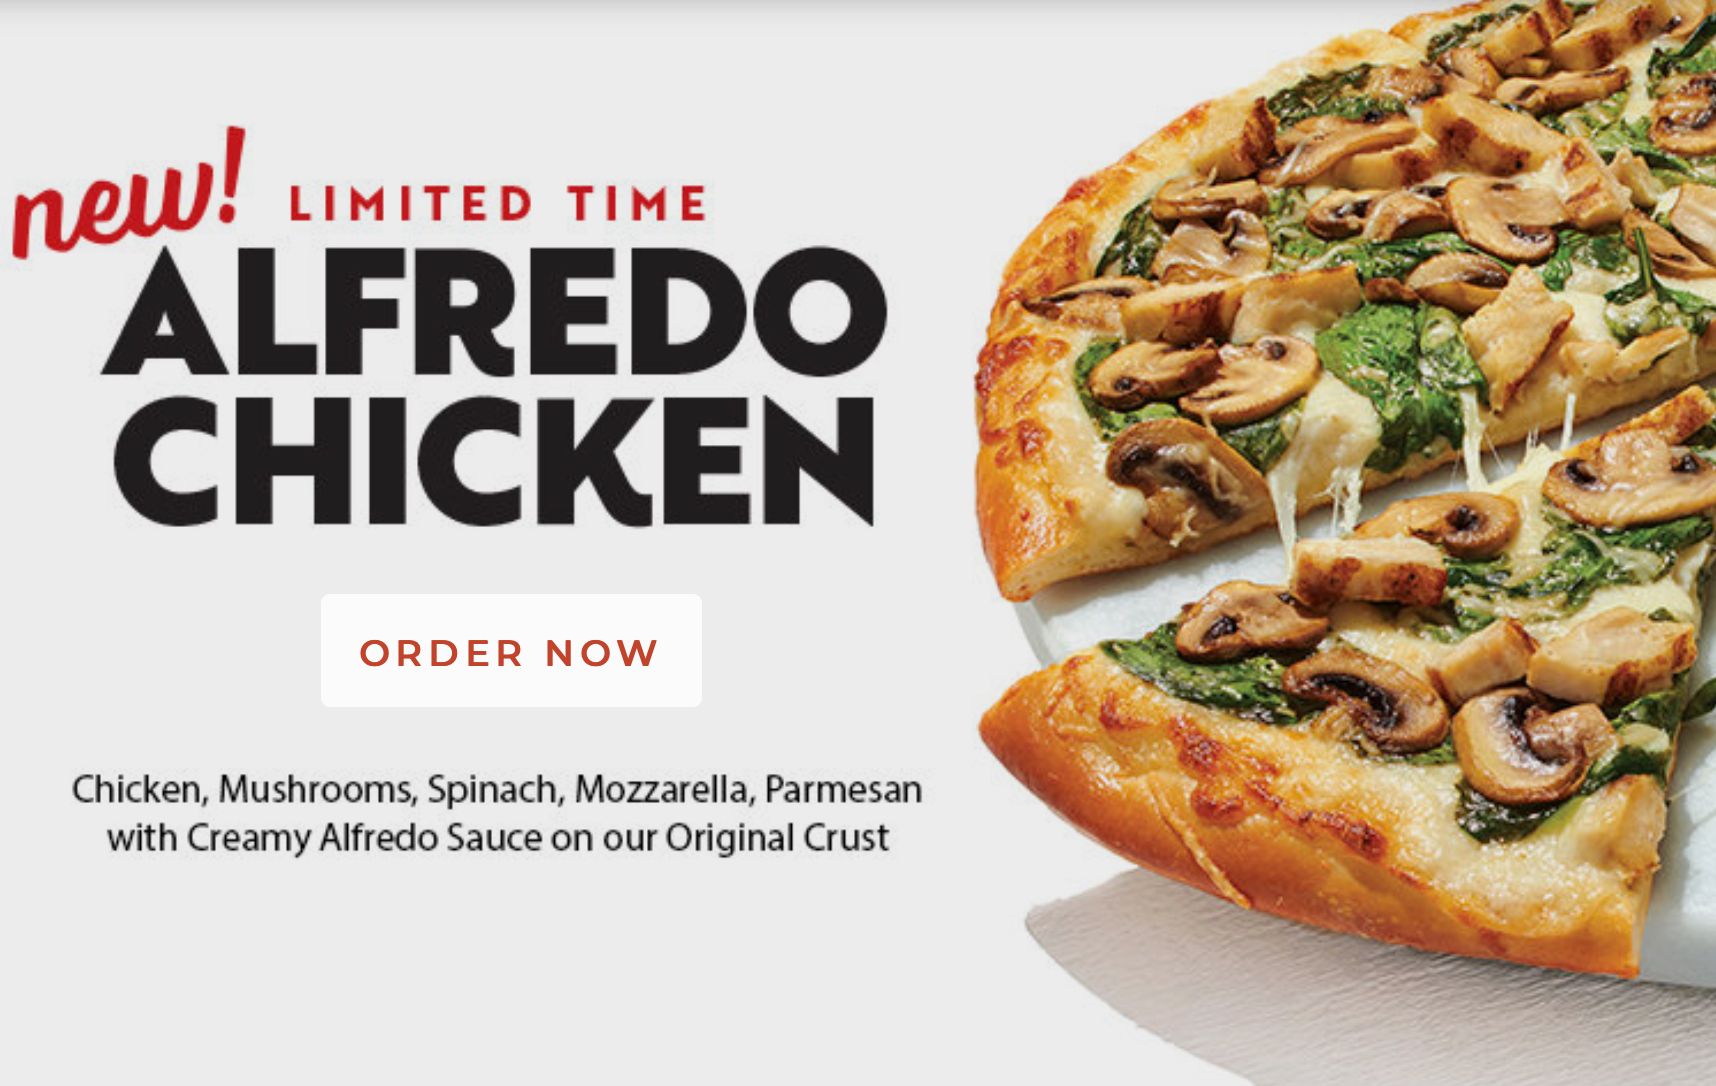 Papa Murphy's Introduces the New Alfredo Chicken Pizza for a Limited Time Only